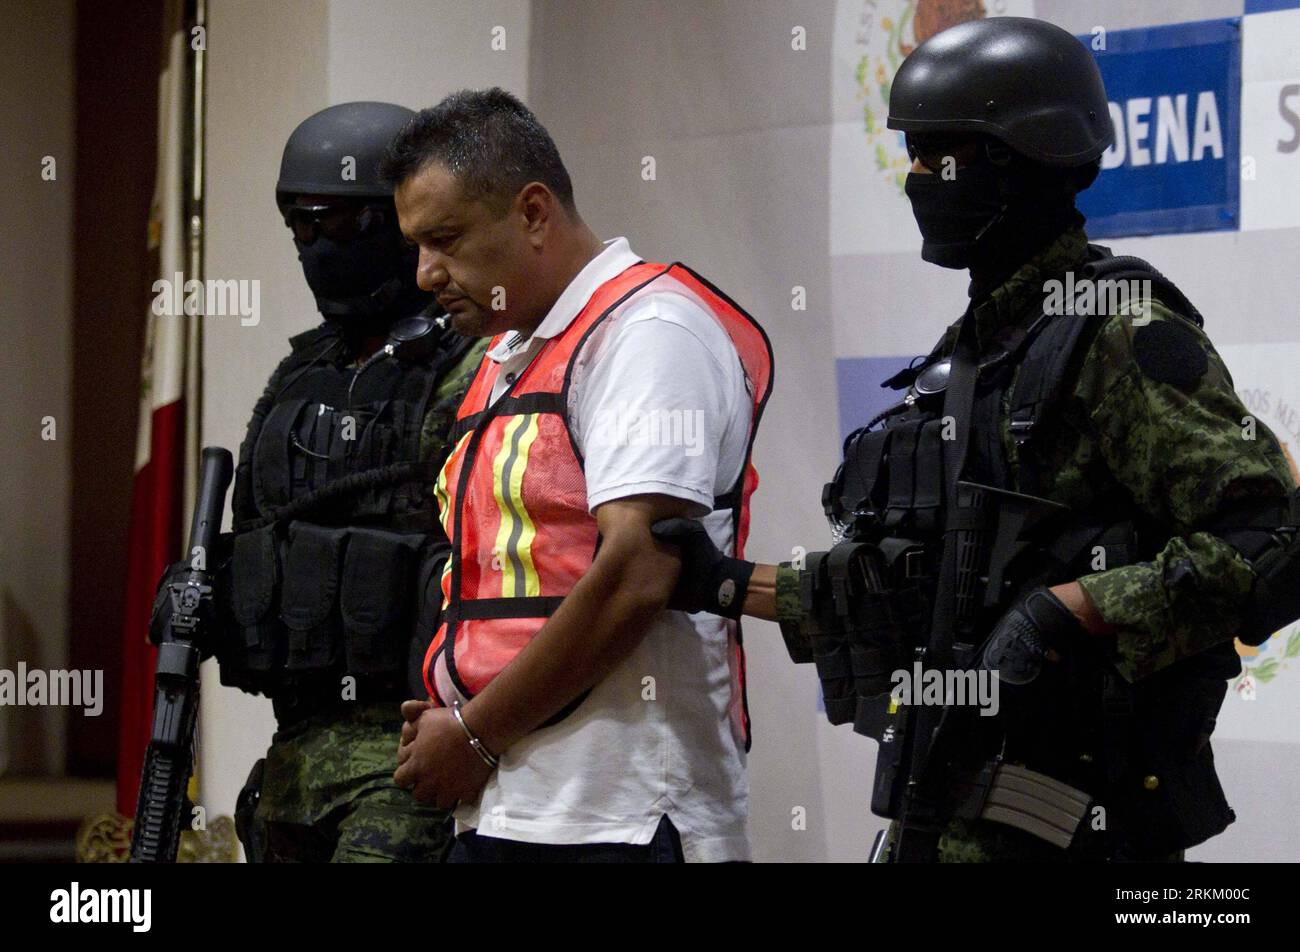 Bildnummer: 56292250  Datum: 17.11.2011  Copyright: imago/Xinhua (111118) -- MEXICO CITY, Nov. 18, 2011 (Xinhua) -- Alfredo Aleman Narvaez (C), known as El Comandante Aleman and alleged leader of the criminal organization Los Zetas and head of criminal activities in the state of San Luis Potosi, is presented to the media in Mexico City, Mexico, Nov. 17, 2011. (Xinhua/Claudio Cruz) (ctt) MEXICO-MEXICO CITY-SECURITY-DRUGS PUBLICATIONxNOTxINxCHN People Kriminalität Verhaftung Mexiko x0x xtm 2011 quer premiumd      56292250 Date 17 11 2011 Copyright Imago XINHUA  Mexico City Nov 18 2011 XINHUA Alf Stock Photo